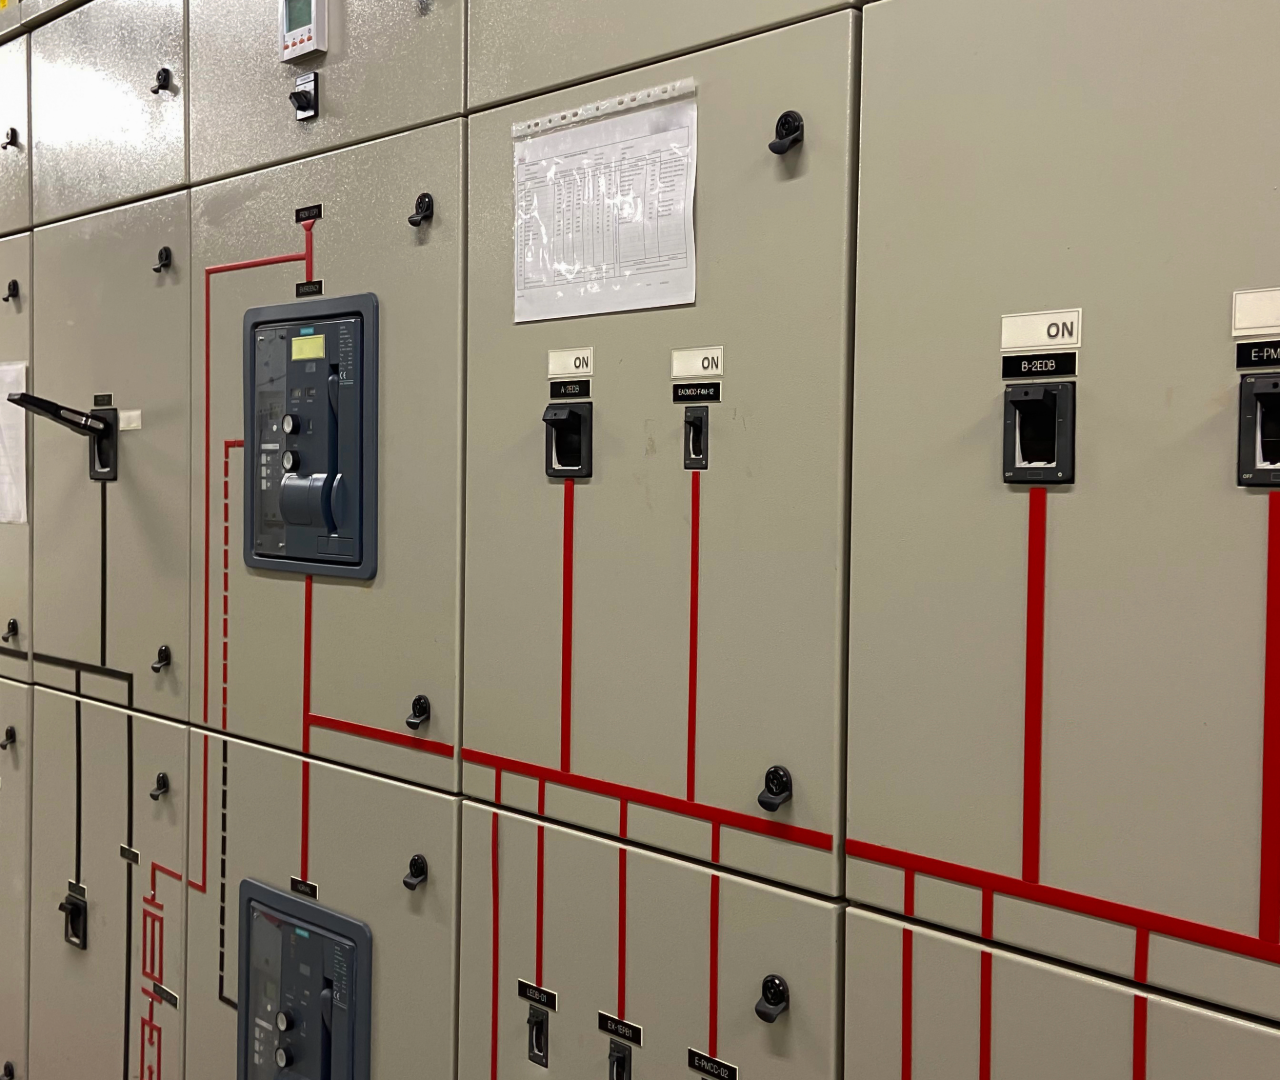 Tampa Bay Machine Wiring, Industrial Control Systems Tampa, Tampa Bay Industrial Safety Systems, Electrical Retrofitting Services Tampa, Tampa Industrial Surge Protection